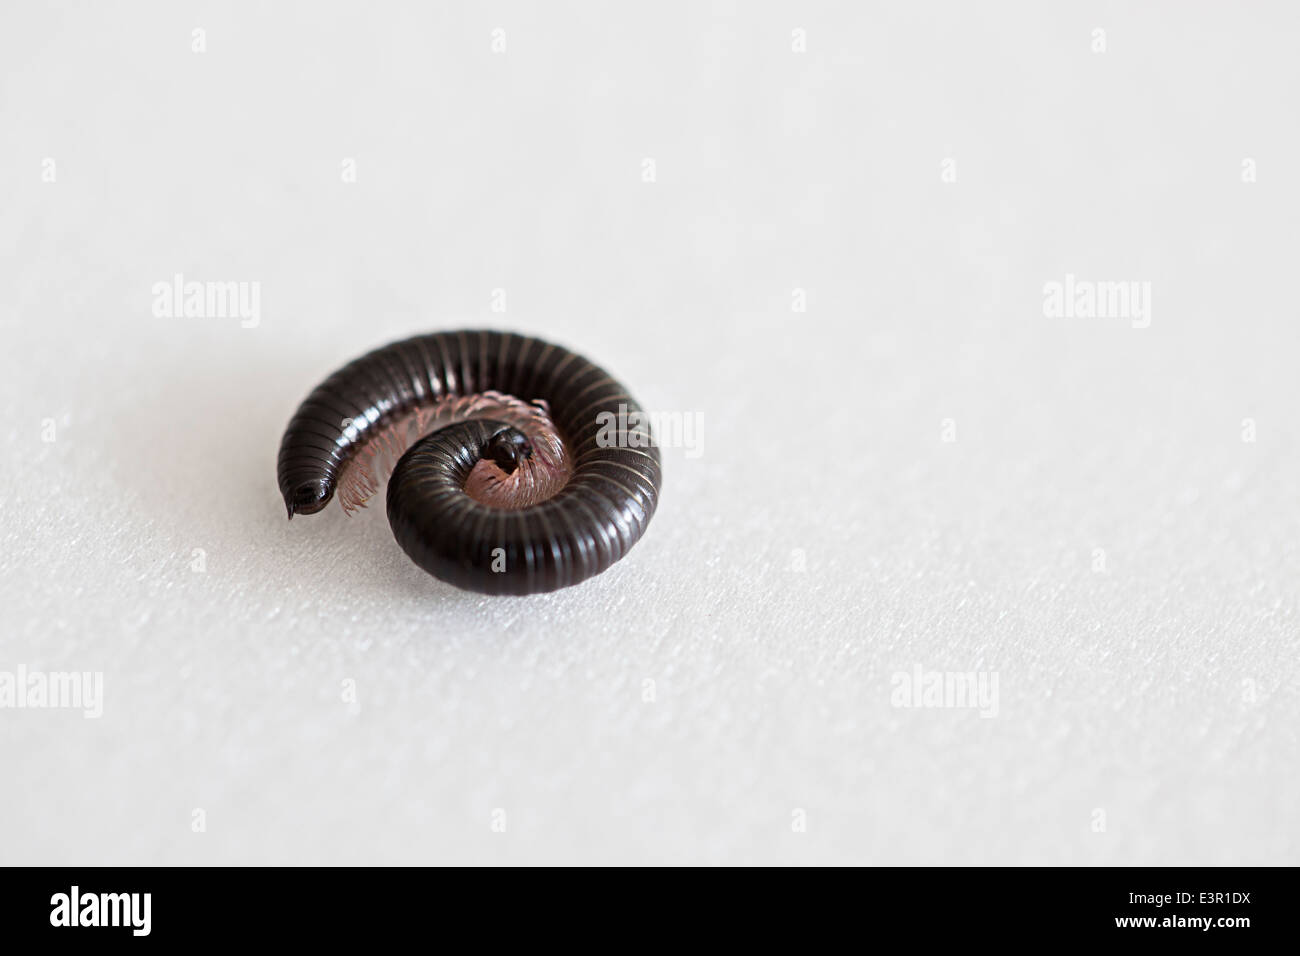 A millipede tightly curled up forming a spiral shape Stock Photo